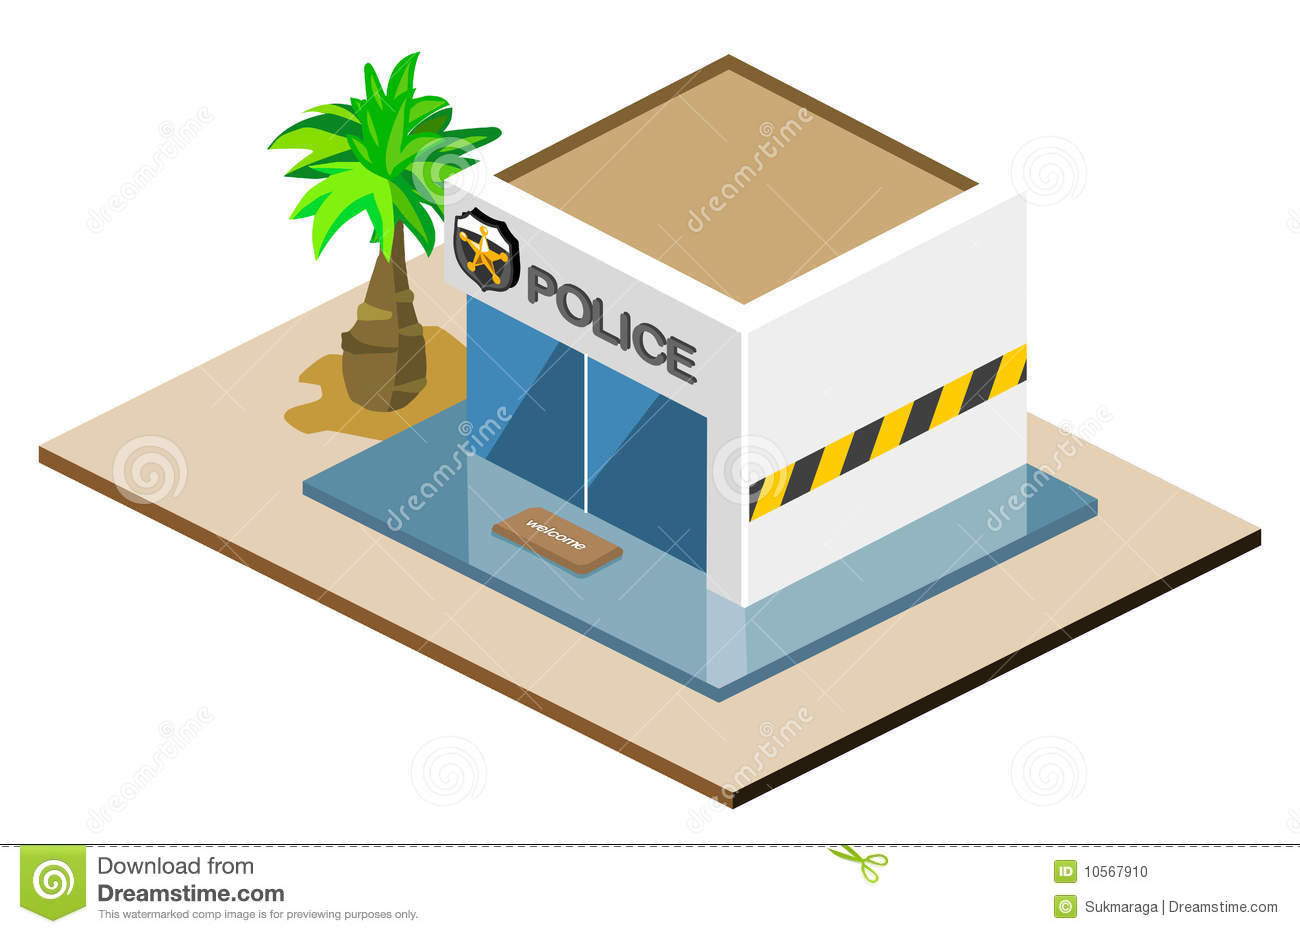 Post Office Building Clipart   Clipart Panda   Free Clipart Images